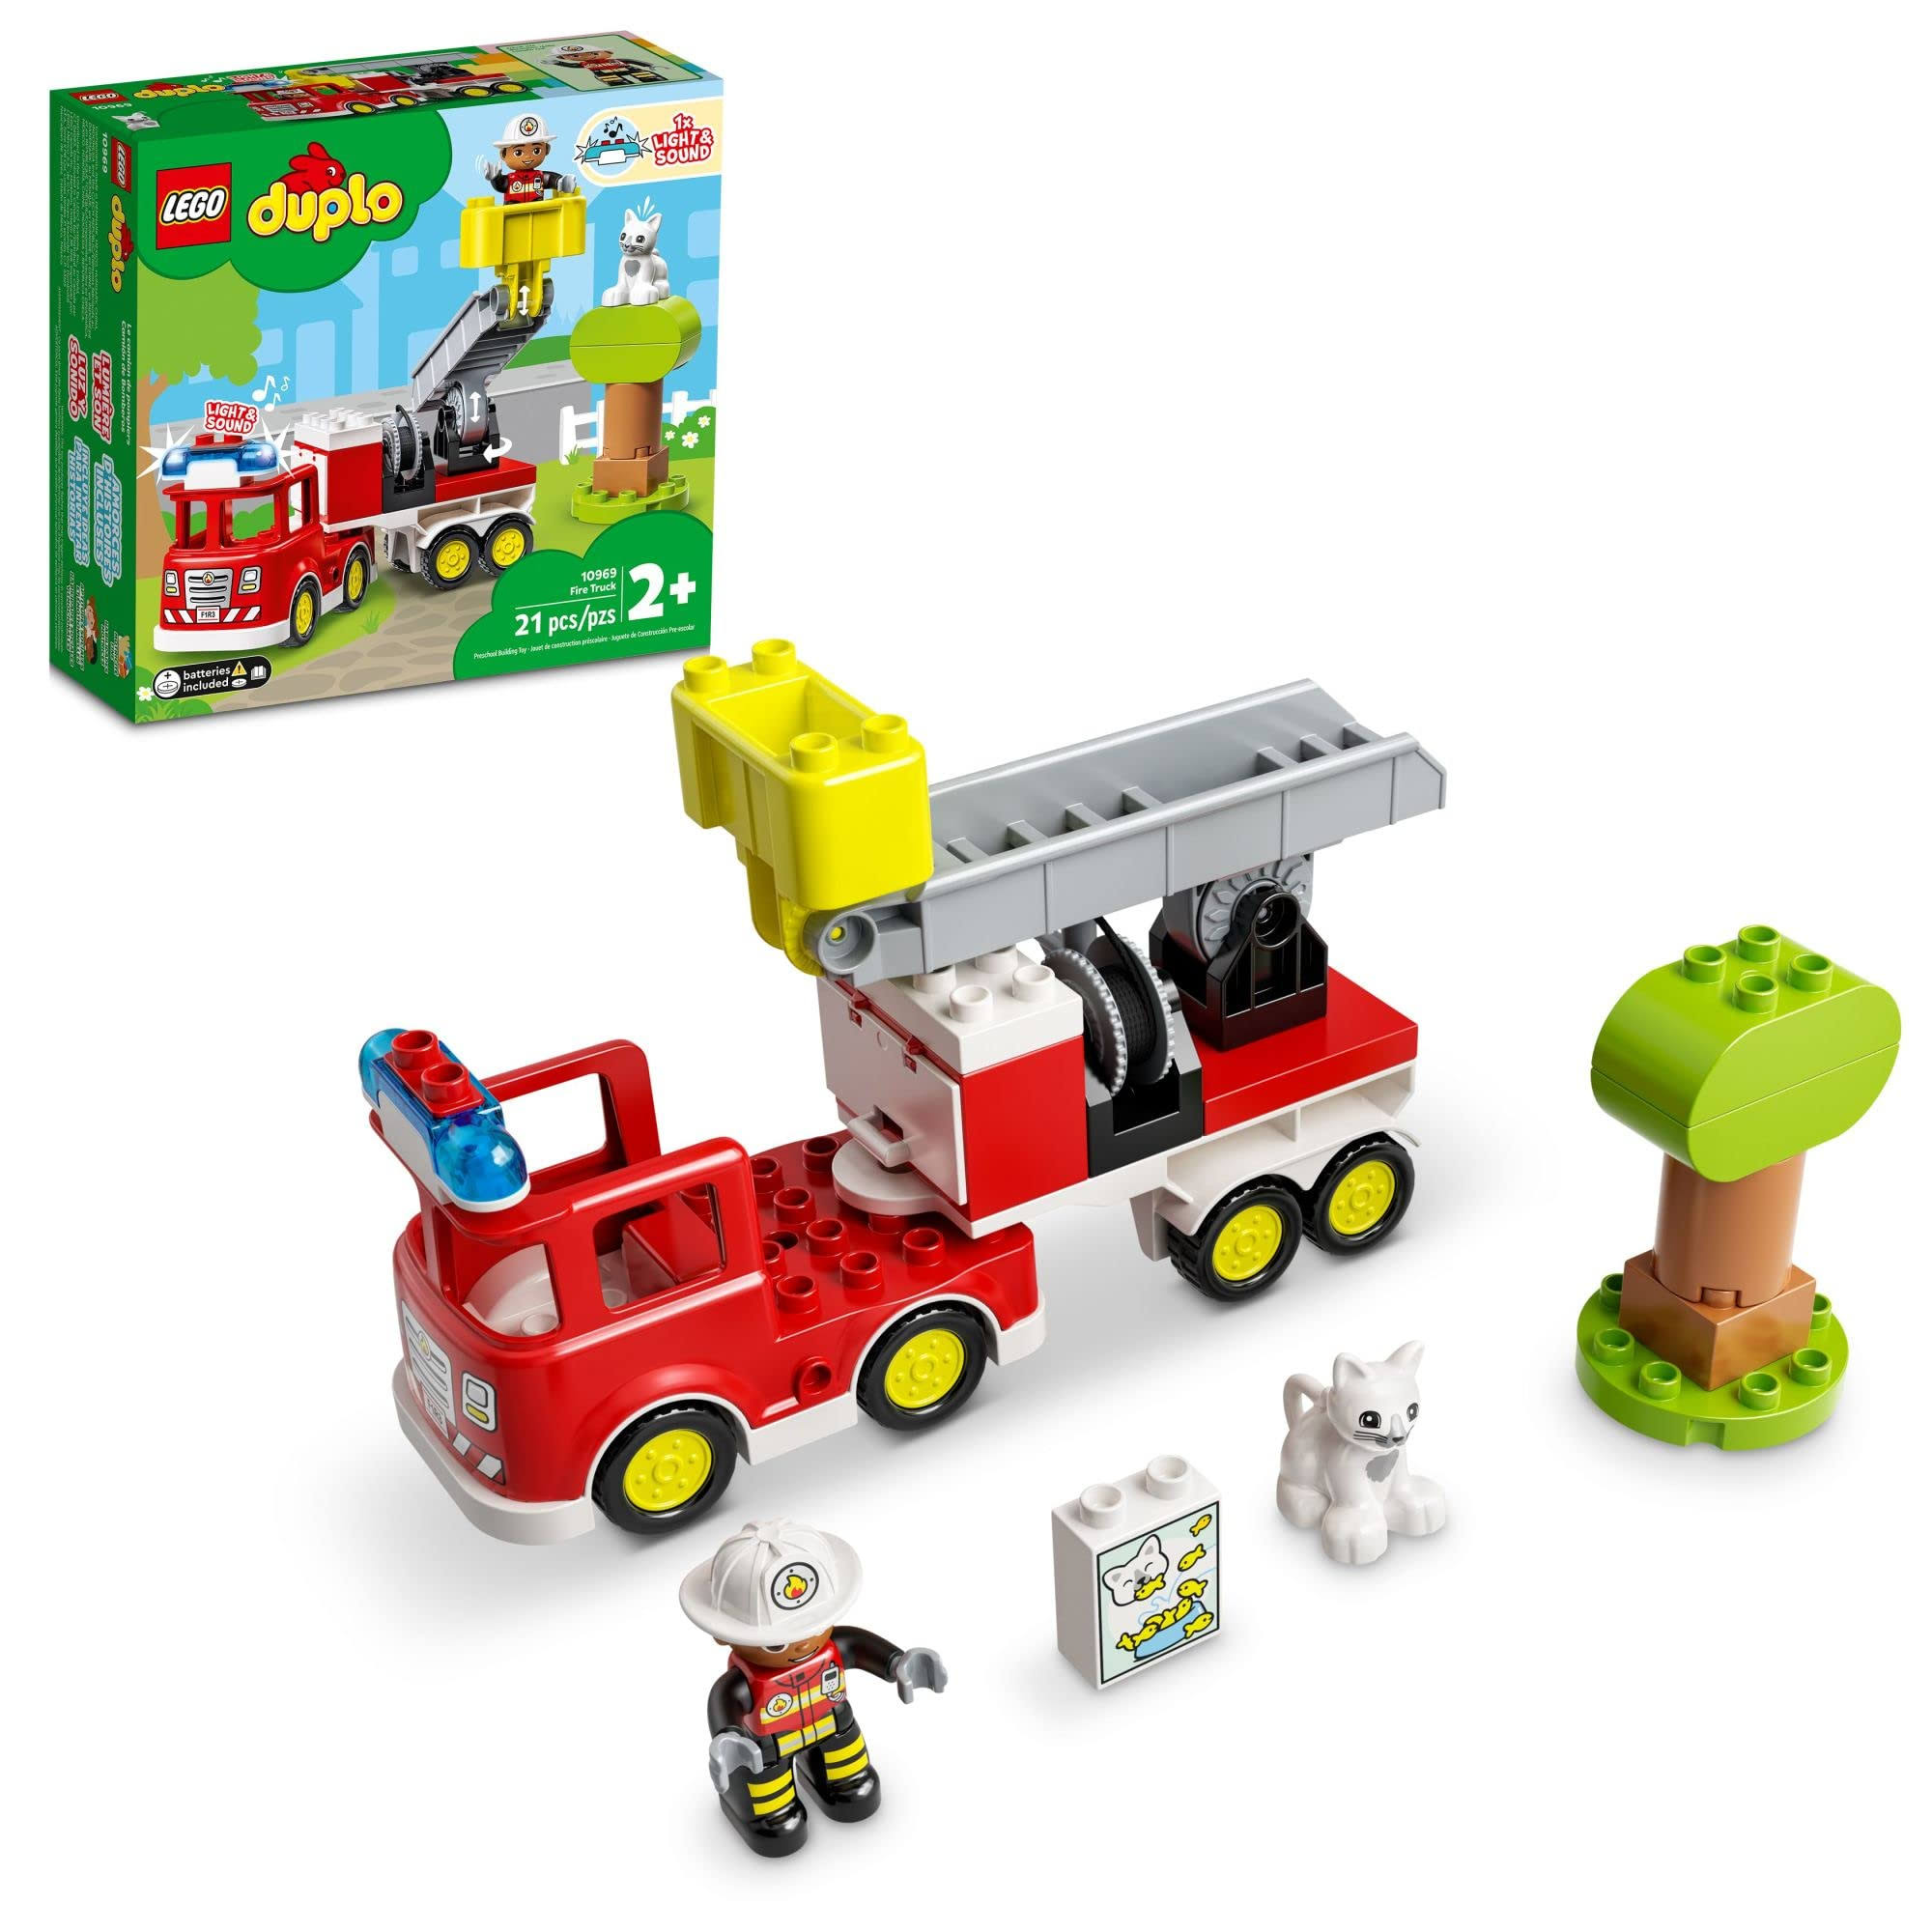 LEGO Duplo Rescue Fire Truck 10969 Building Toy; Firefighter and Fire